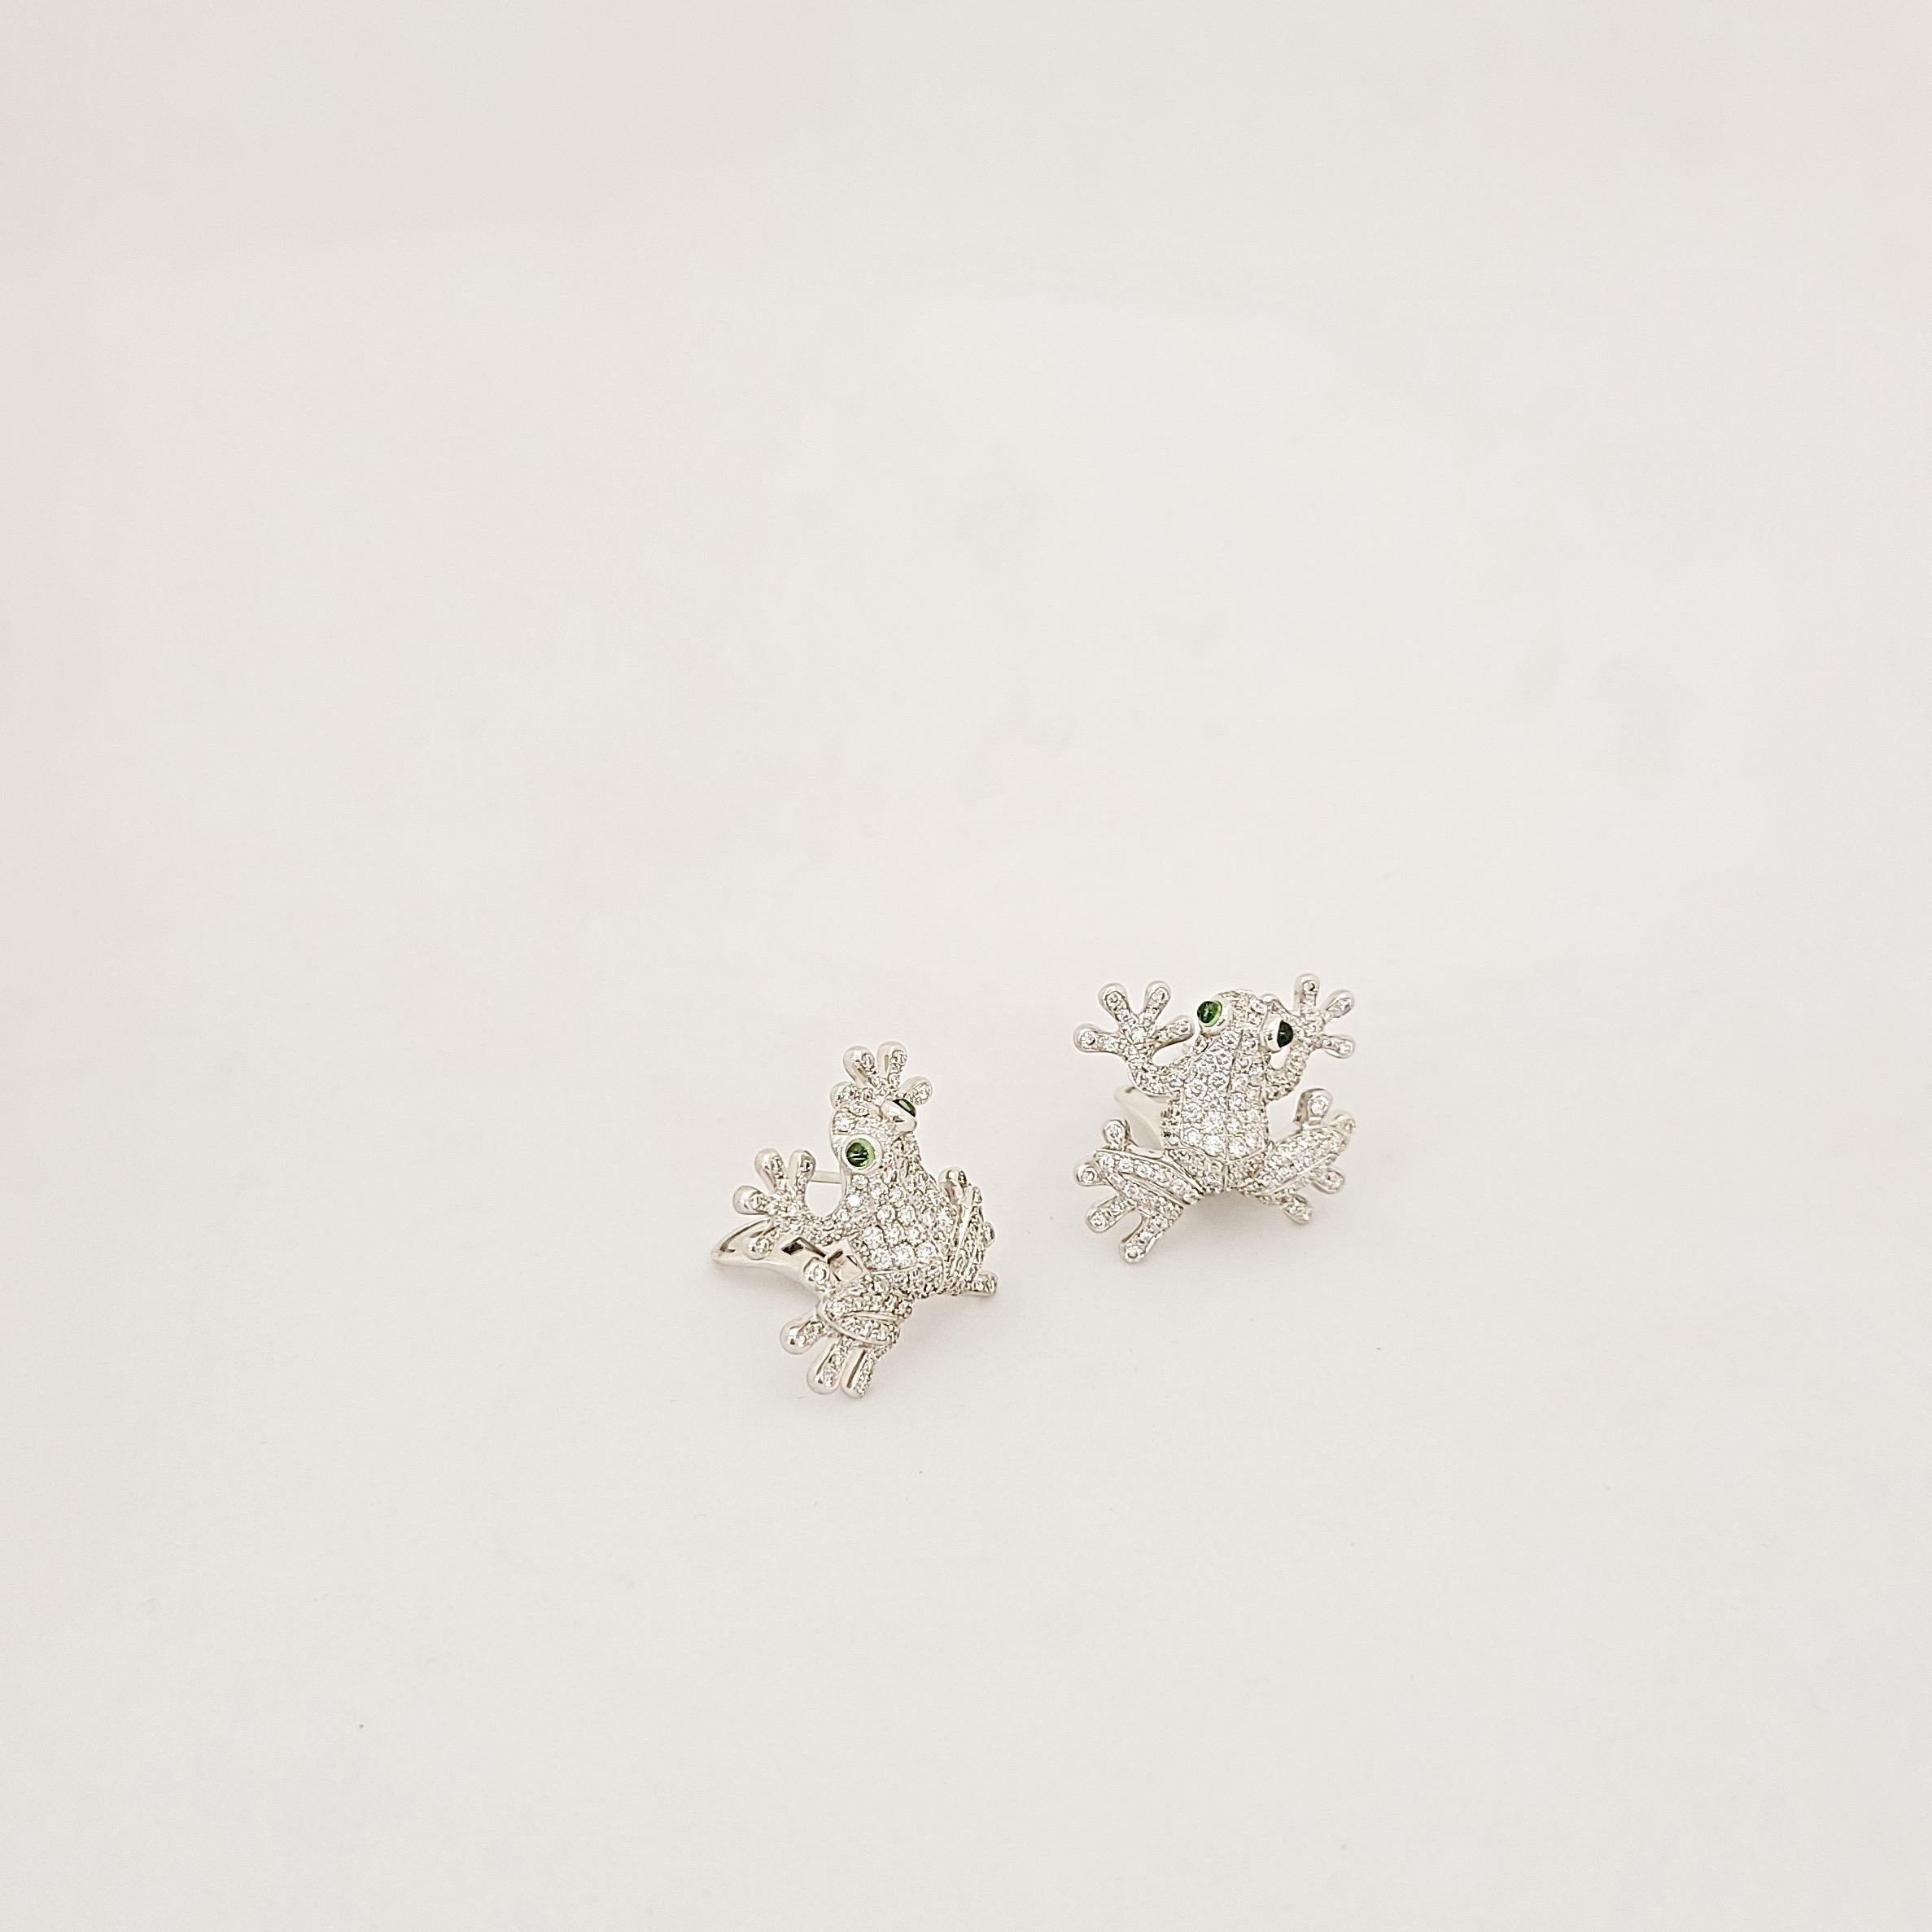 Stenzhorn for Cellini Jewelers NYC fun frog earrings are set with 2.30Ct. of diamonds and accented with .40Ct. Cabochon Tsavorites for eyes. 
Measurements are approximately .88